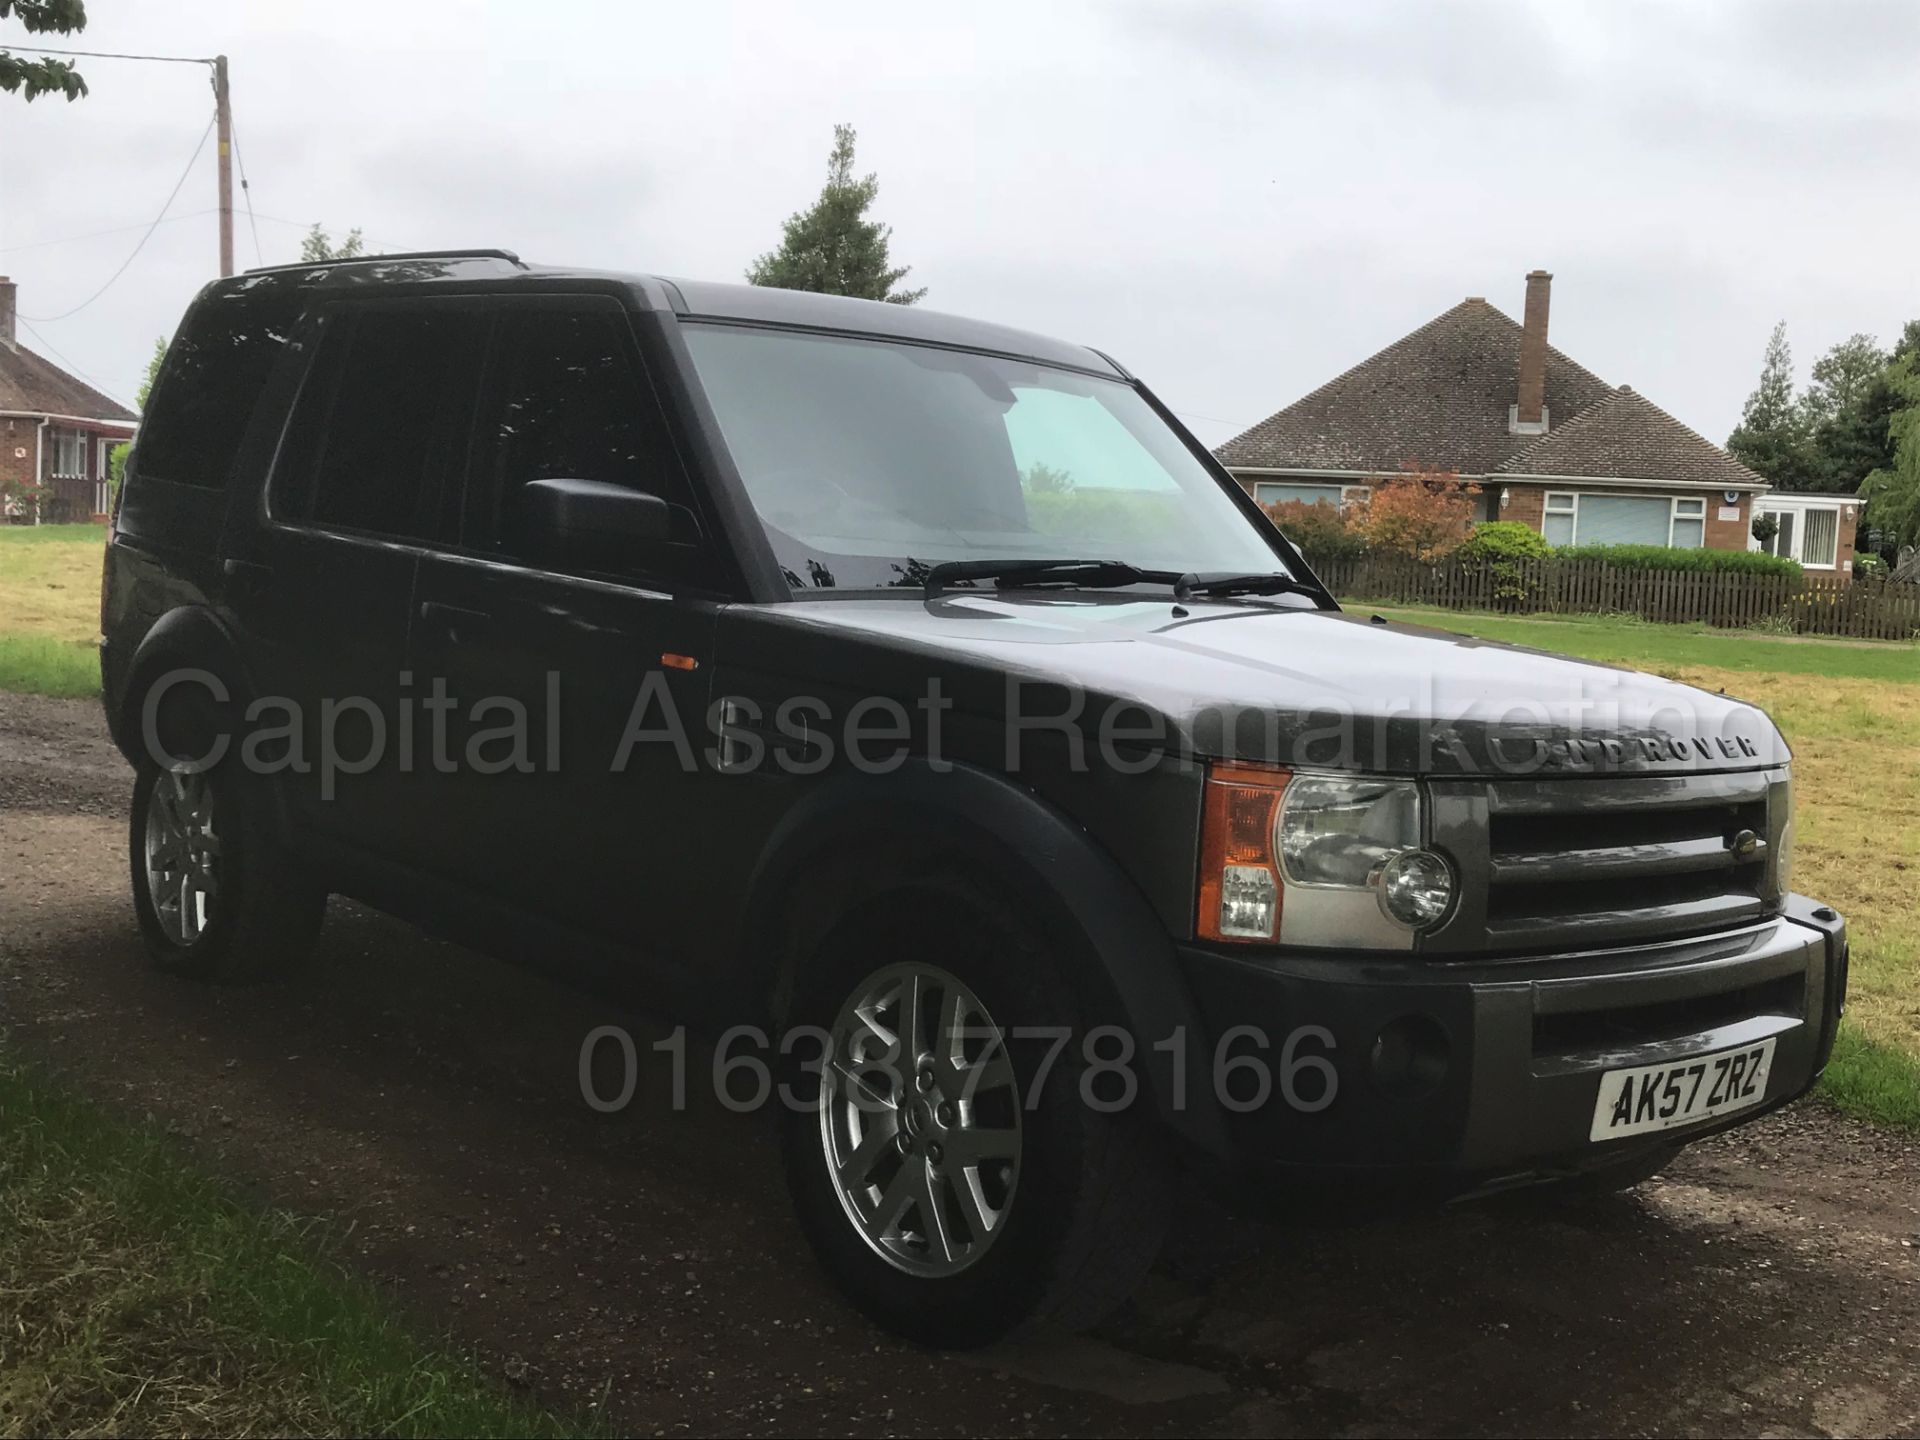 (On Sale) LAND ROVER DISCOVERY 3 'XS EDITION' **COMMERCIAL VAN**(2008 MODEL) 'TDV6-190 BHP' (NO VAT) - Image 2 of 38